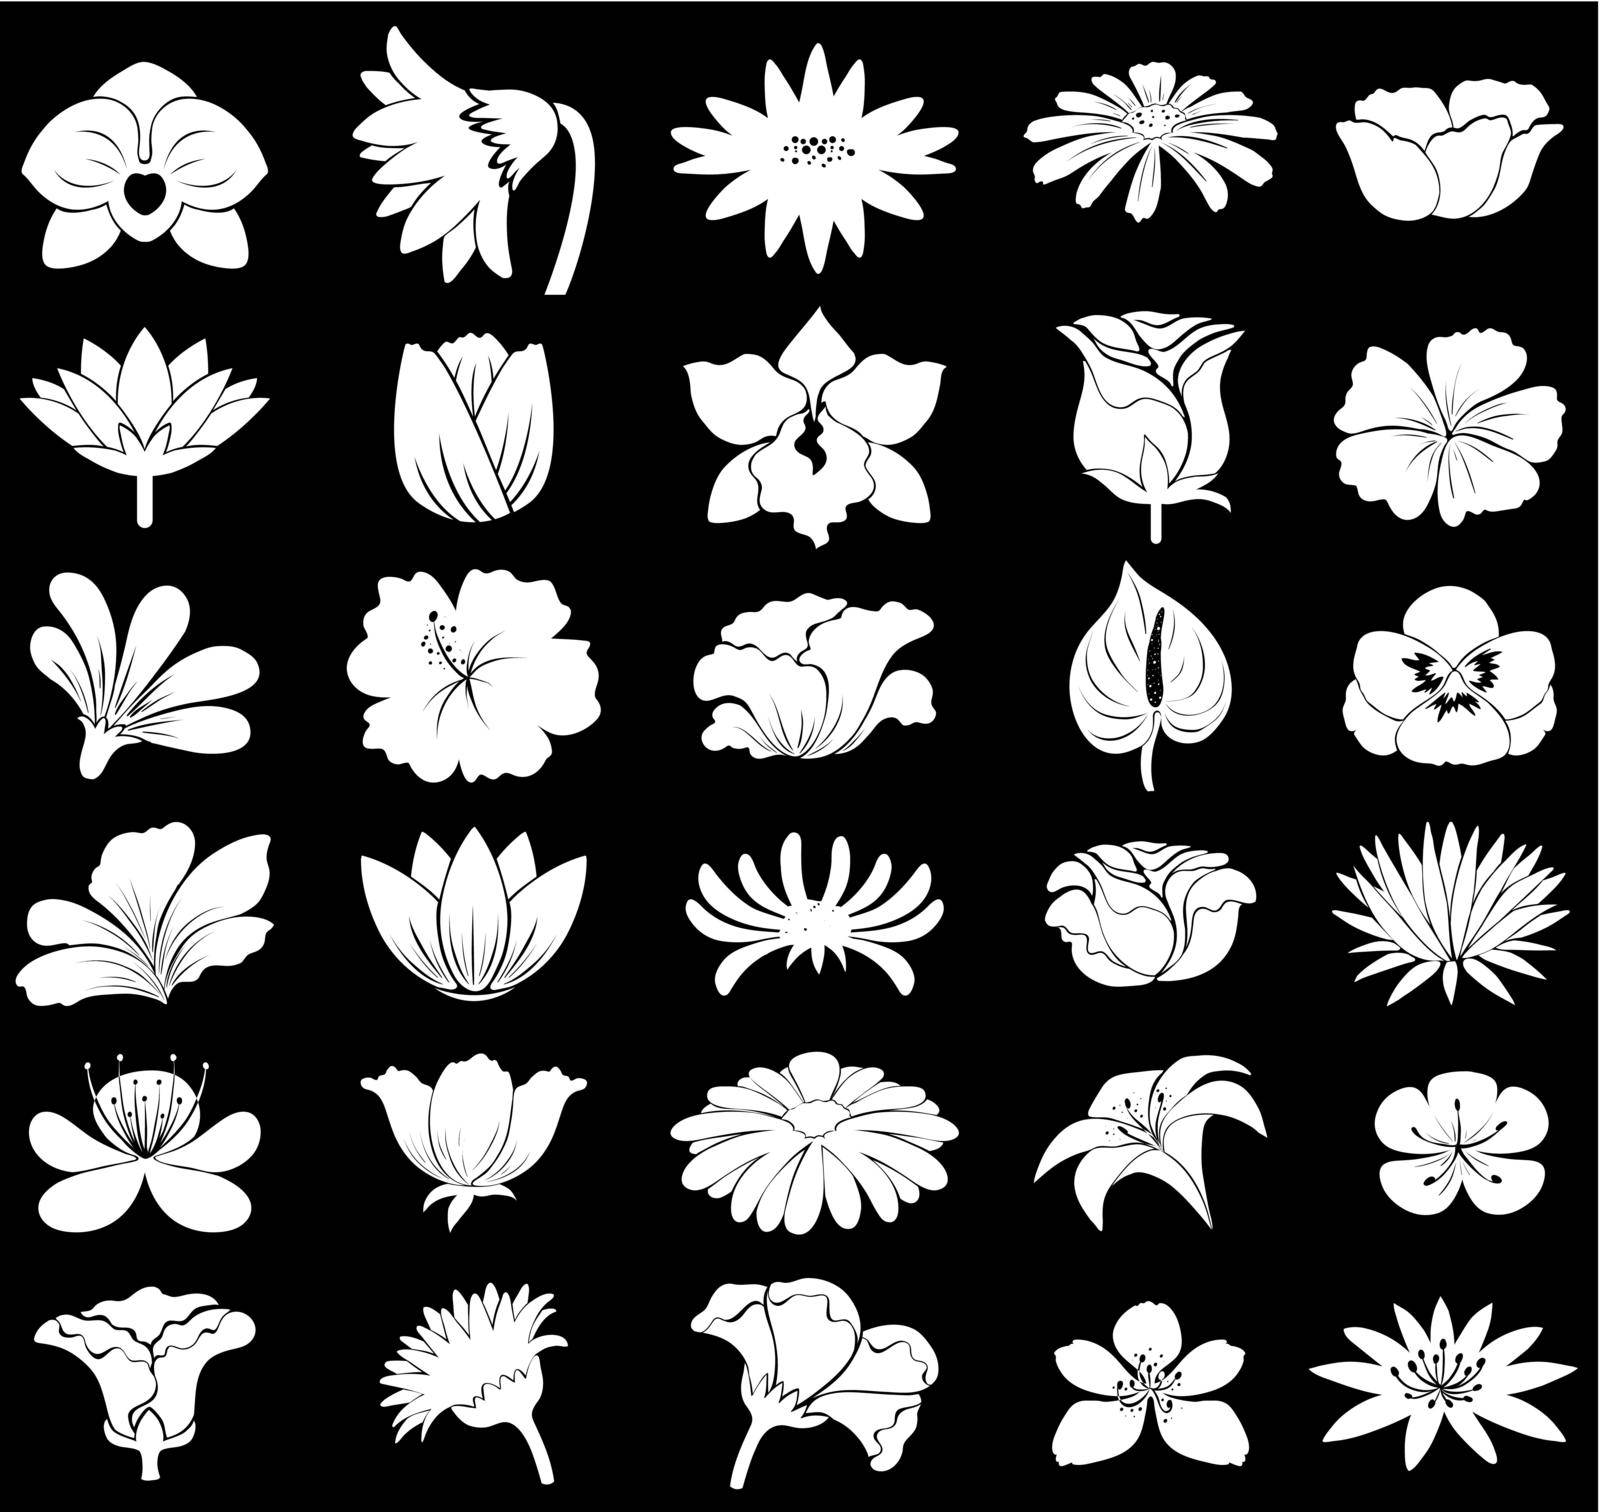 Collection of different types of flowers